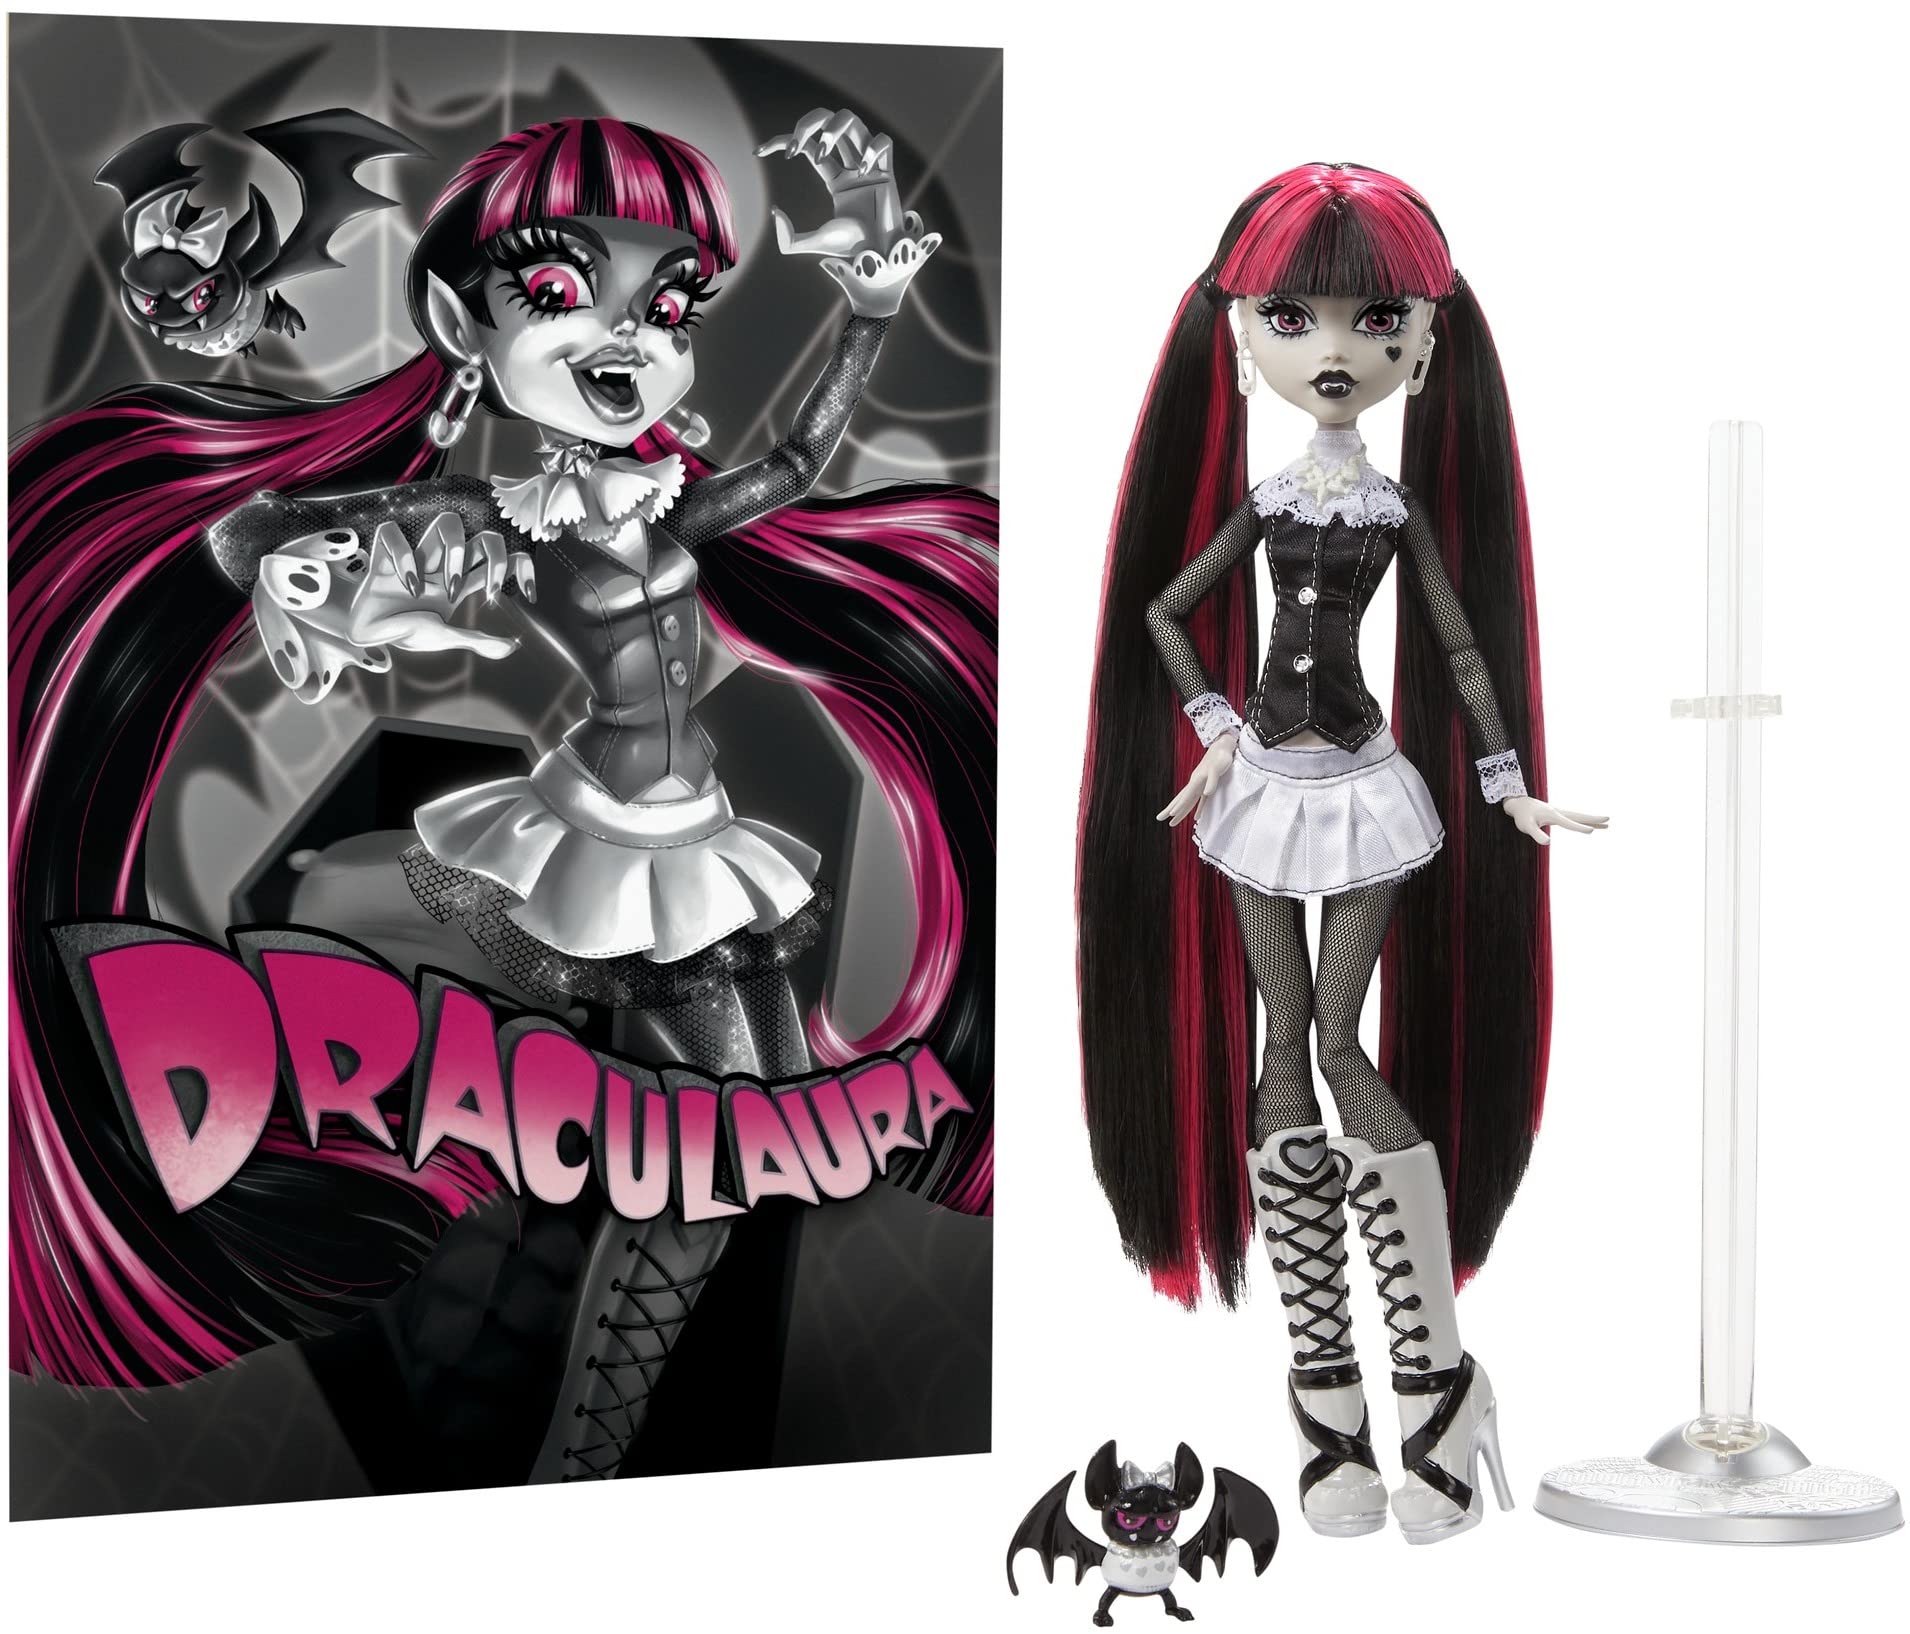 Monster High Doll, Draculaura in Black and White, Reel Drama Collector Doll, Doll-Size and Life-Size Posters, Horror Flick Theme, Toys and Gifts